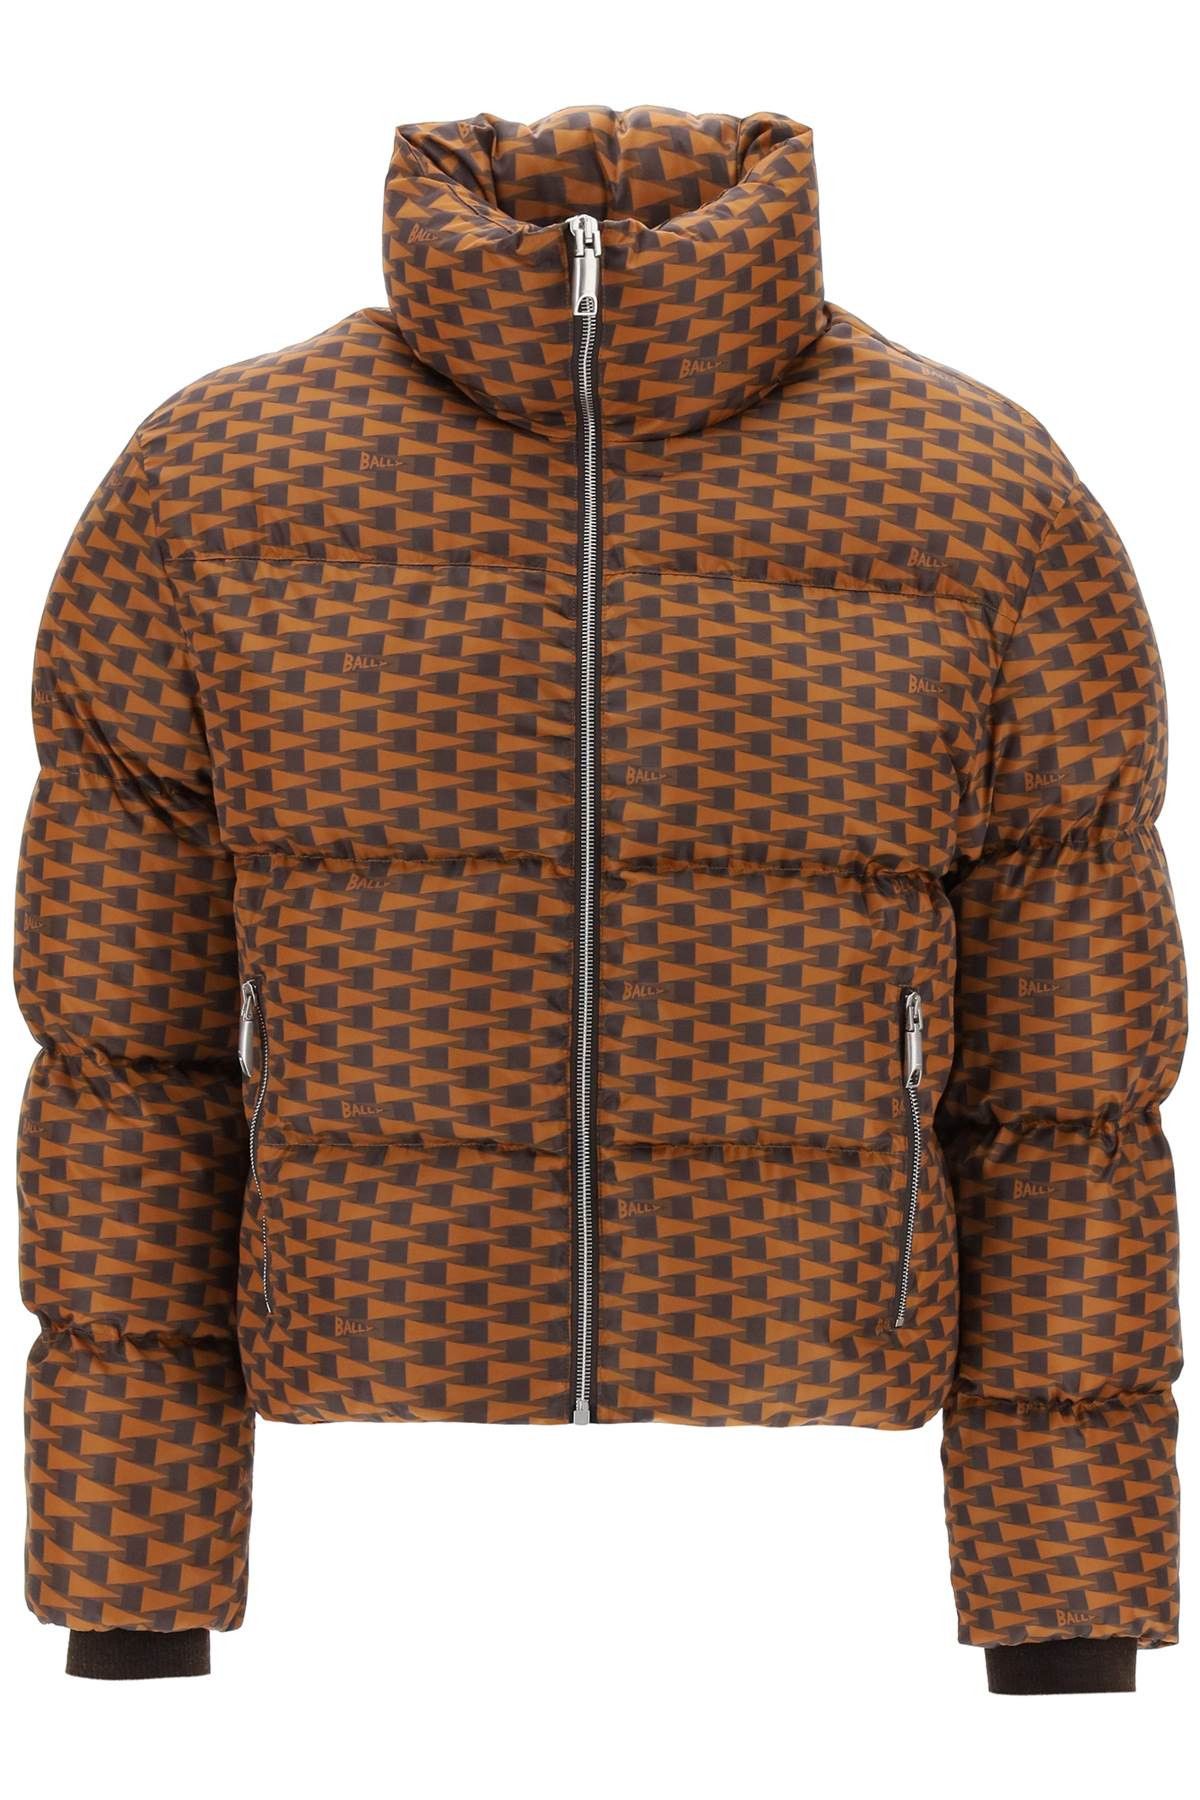 Bally Bally short puffer jacket with pennant motif | Grailed